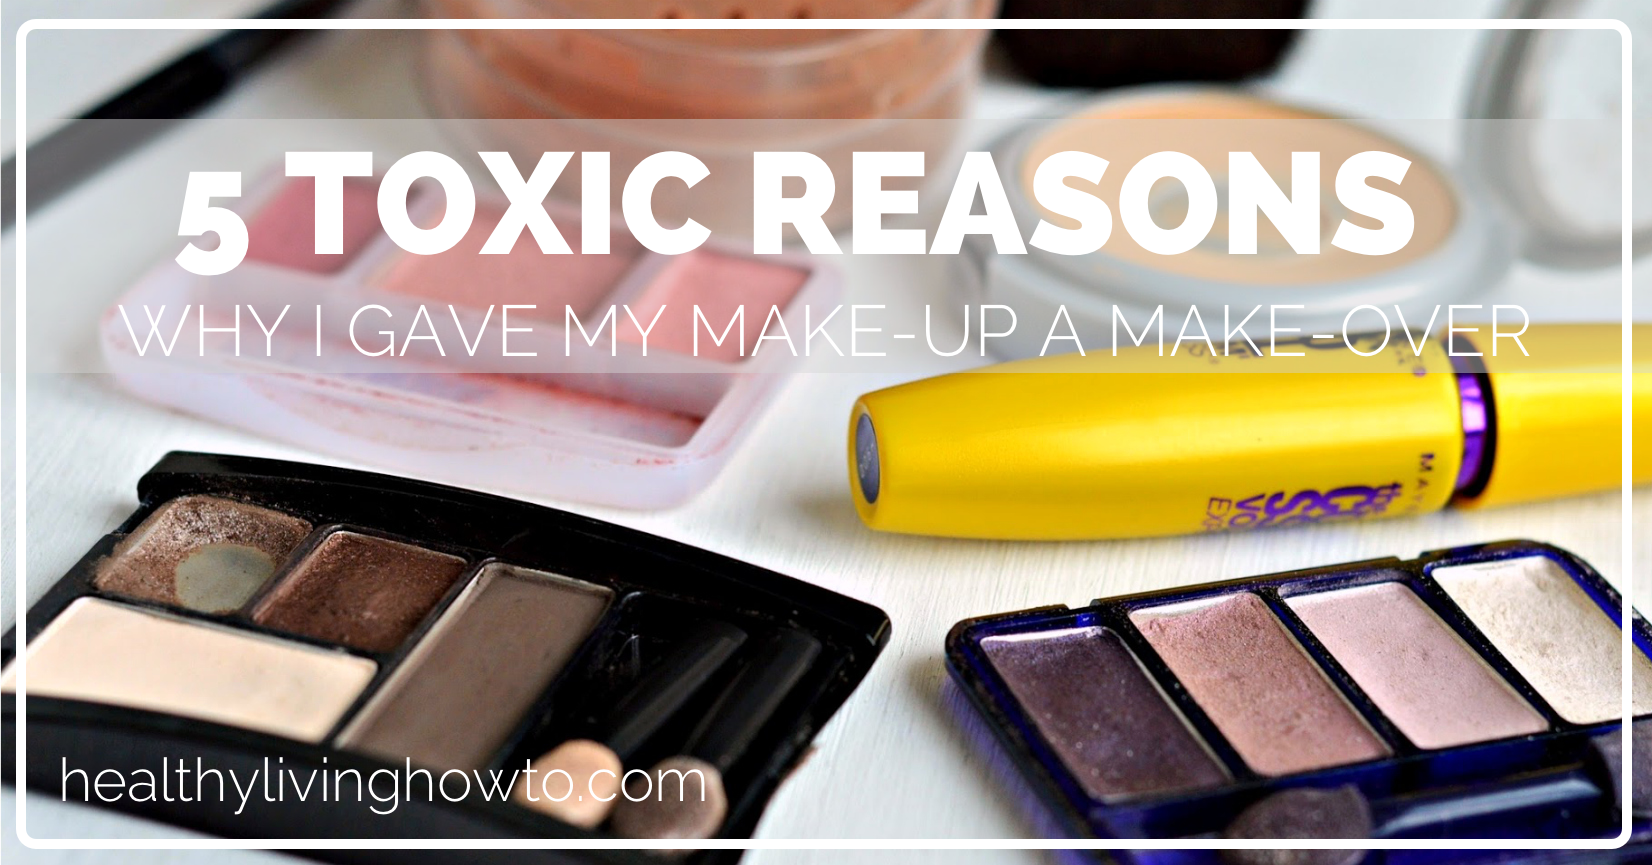 5 Toxic Reasons I Gave My Make Up A Make Over | healthylivinghowto.com